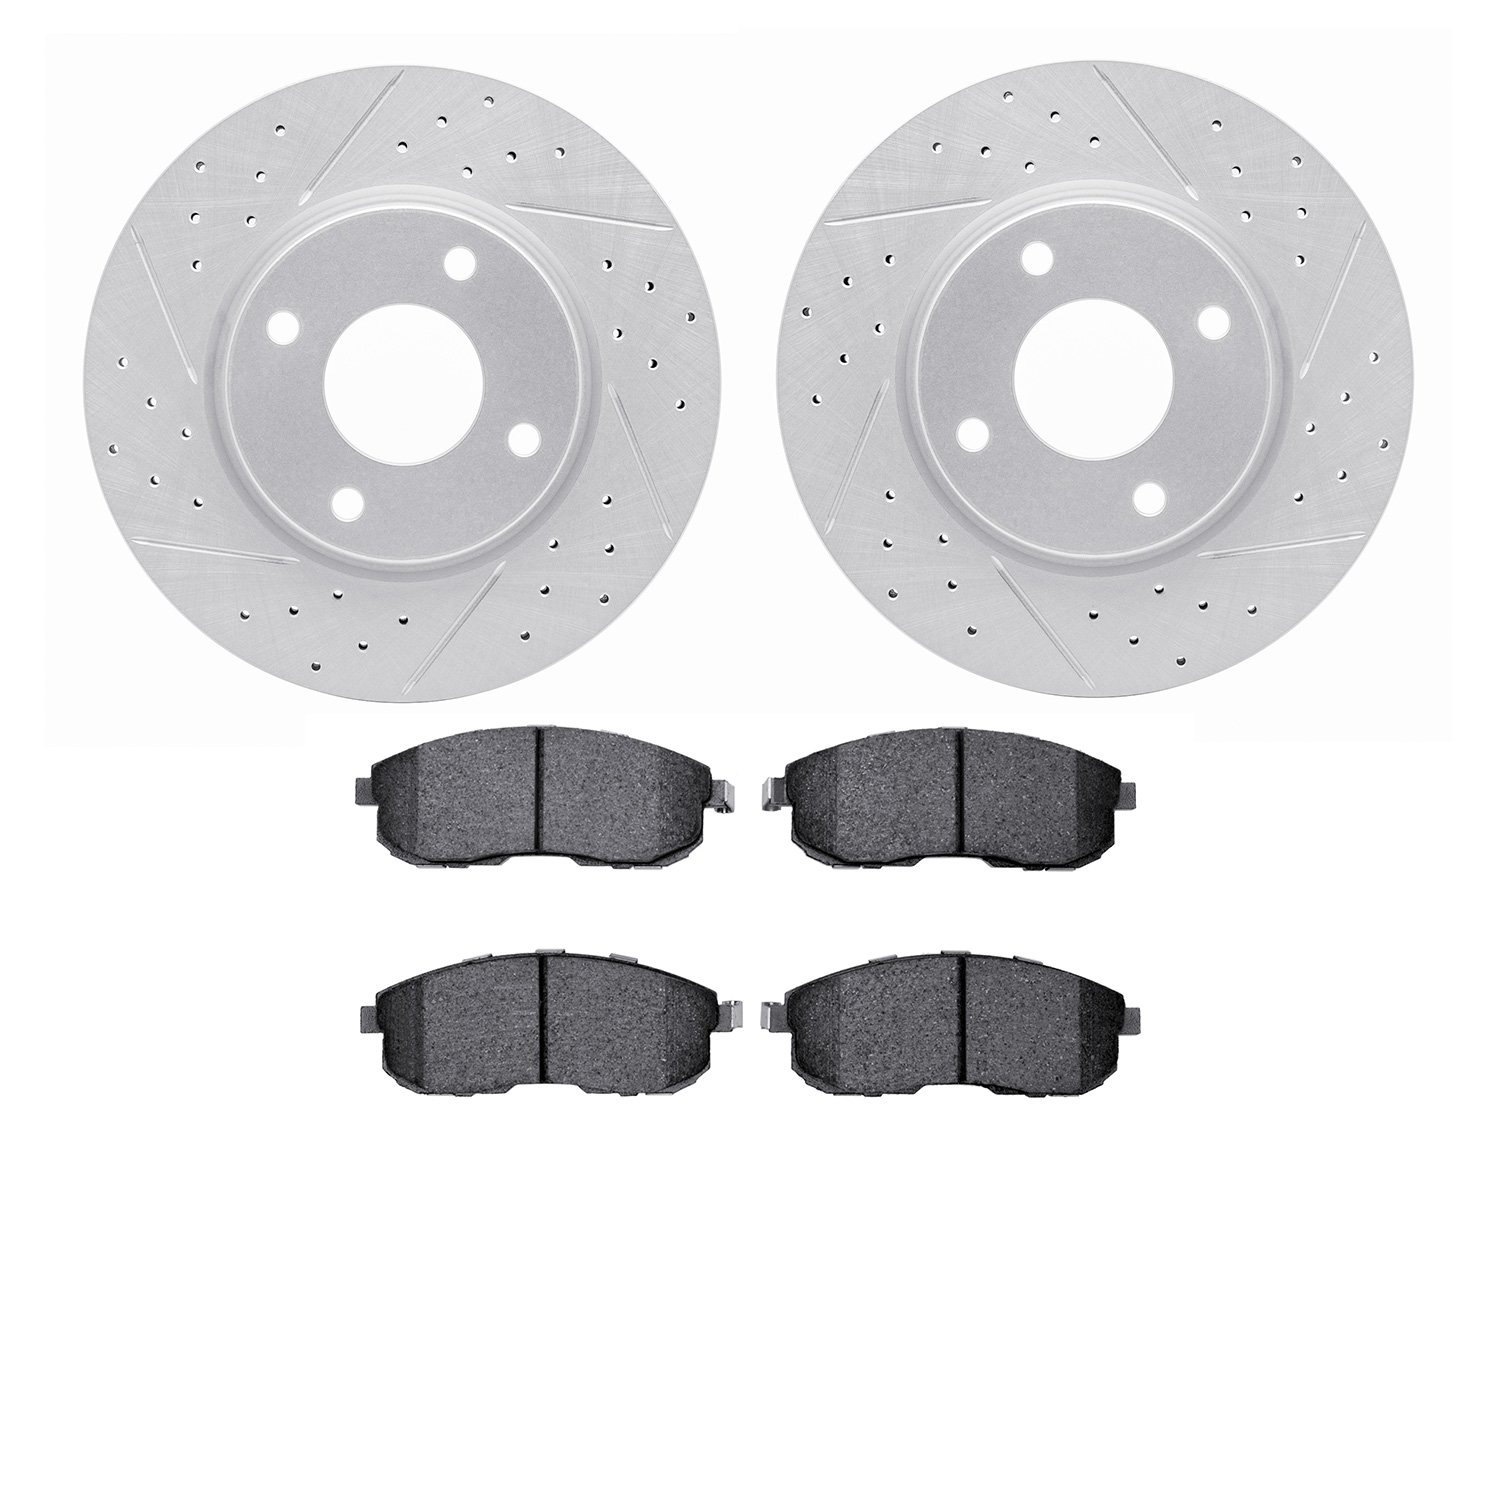 2602-67012 Geoperformance Drilled/Slotted Rotors w/5000 Euro Ceramic Brake Pads Kit, 2007-2012 Infiniti/Nissan, Position: Front